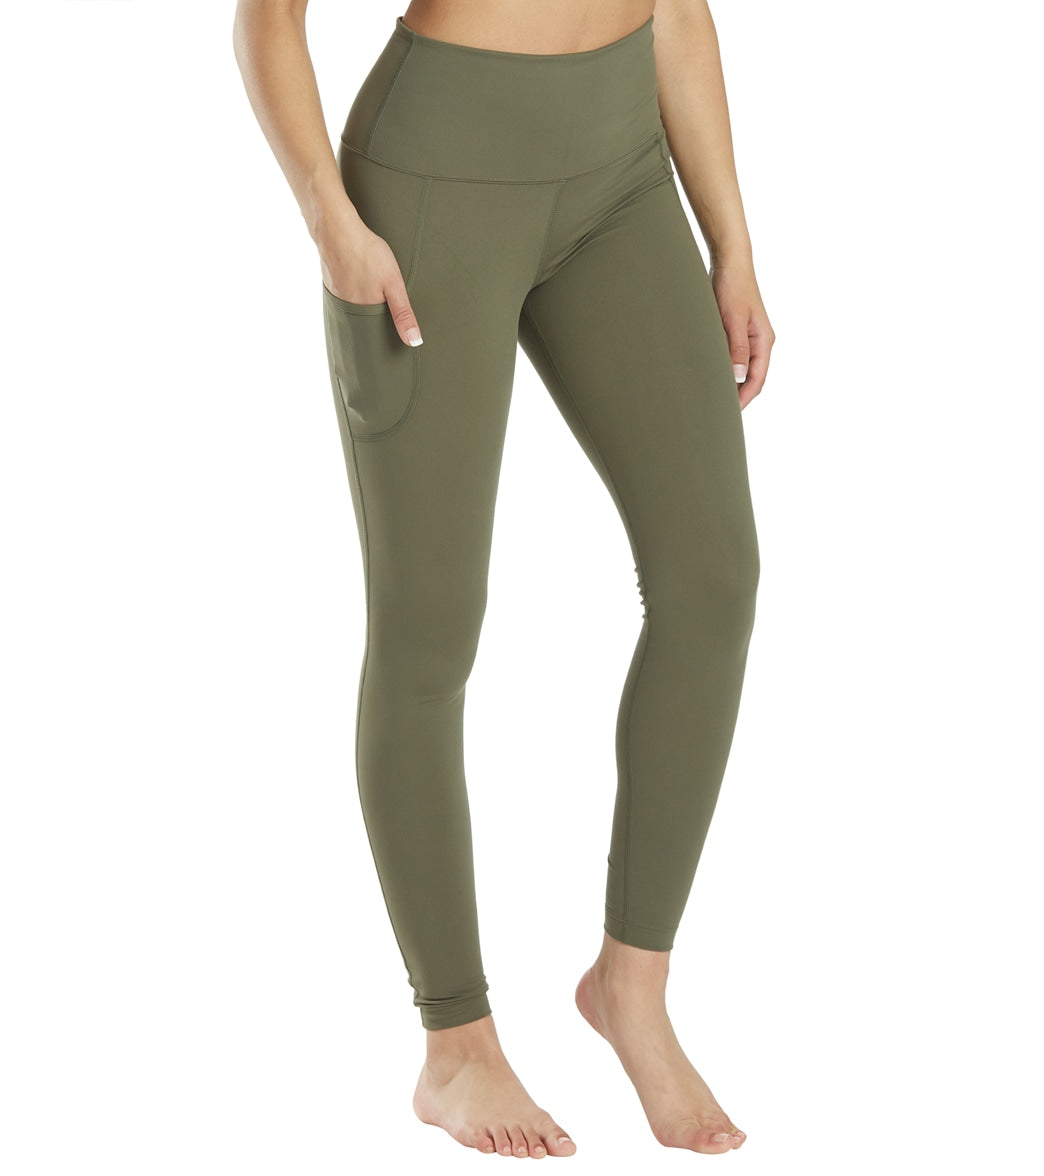 Everyday Yoga High Waisted Go-To Pocket Leggings at YogaOutlet.com –